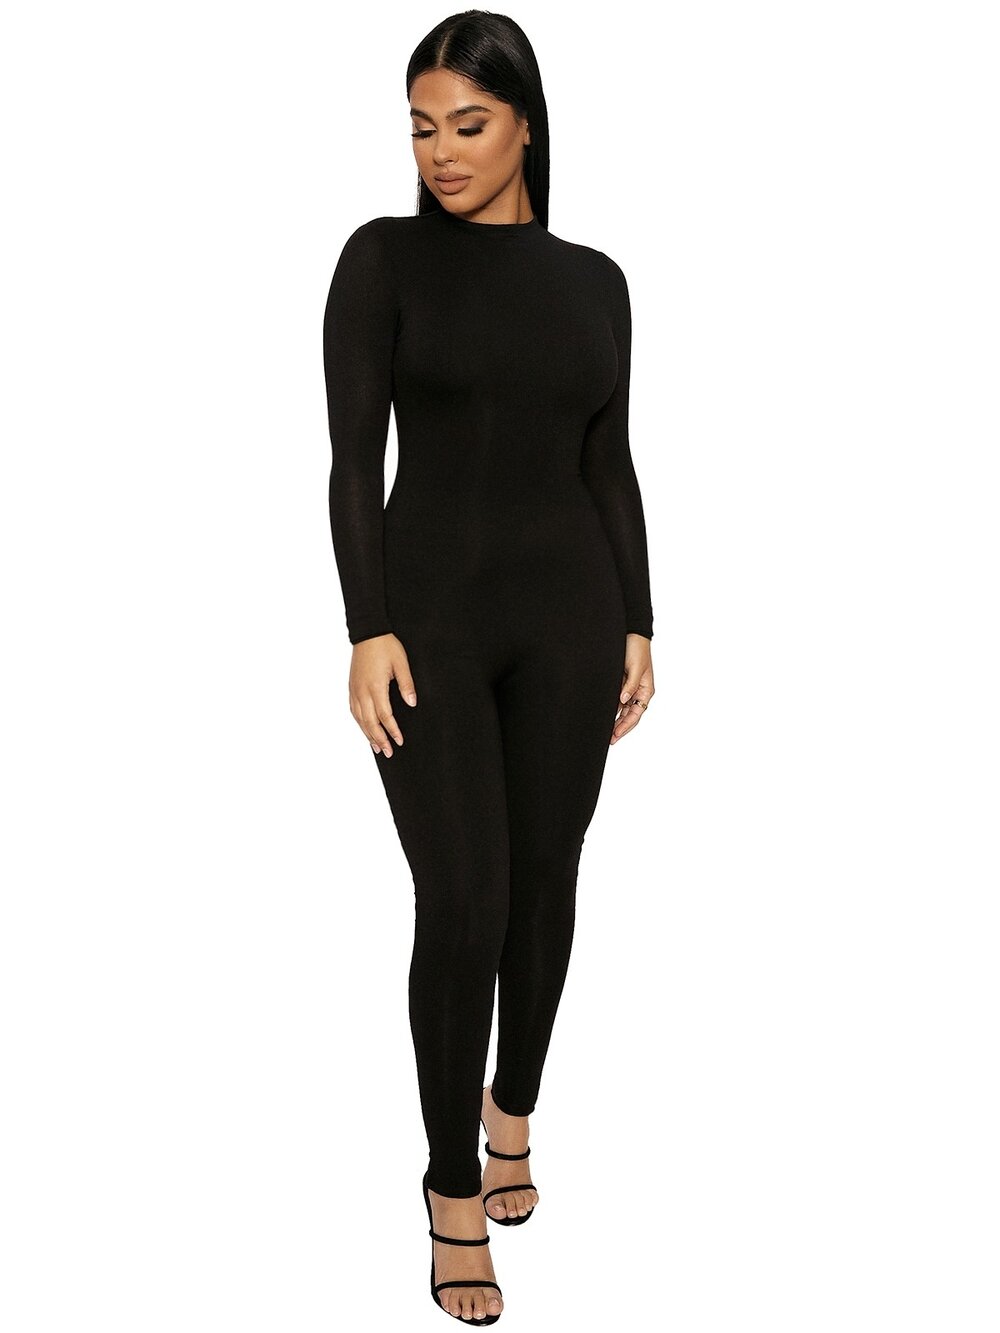 The NW All Body Jumpsuit